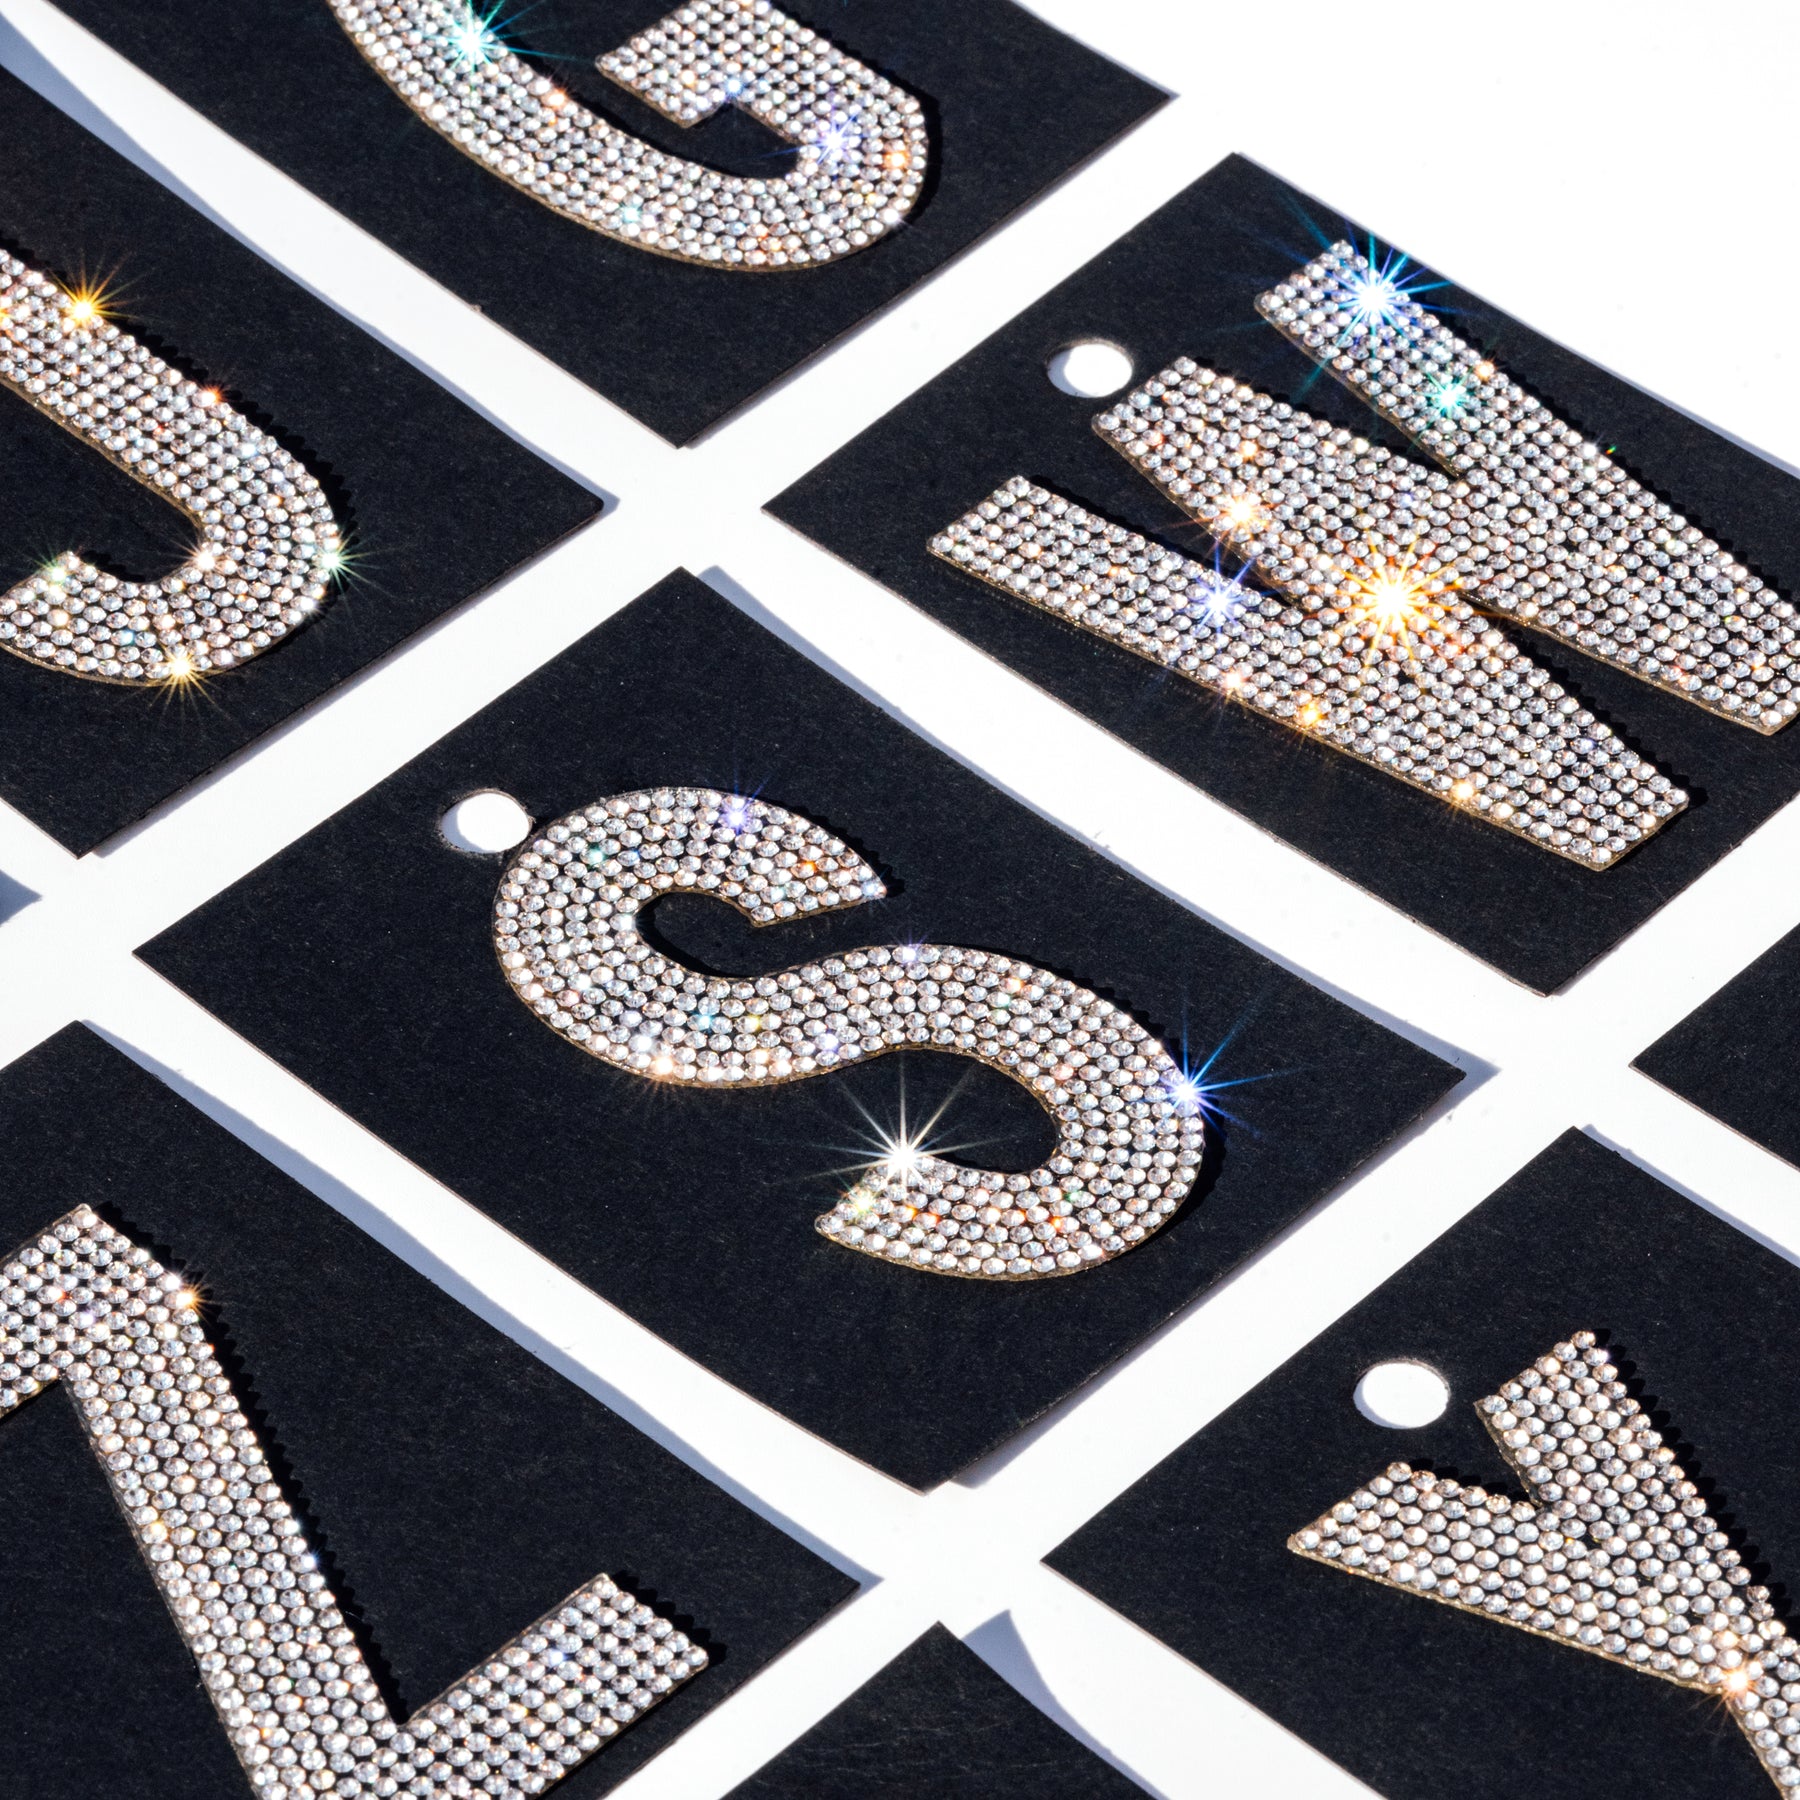 2 Rhinestone Hotfix Small Patch Letters Numbers Symbols in